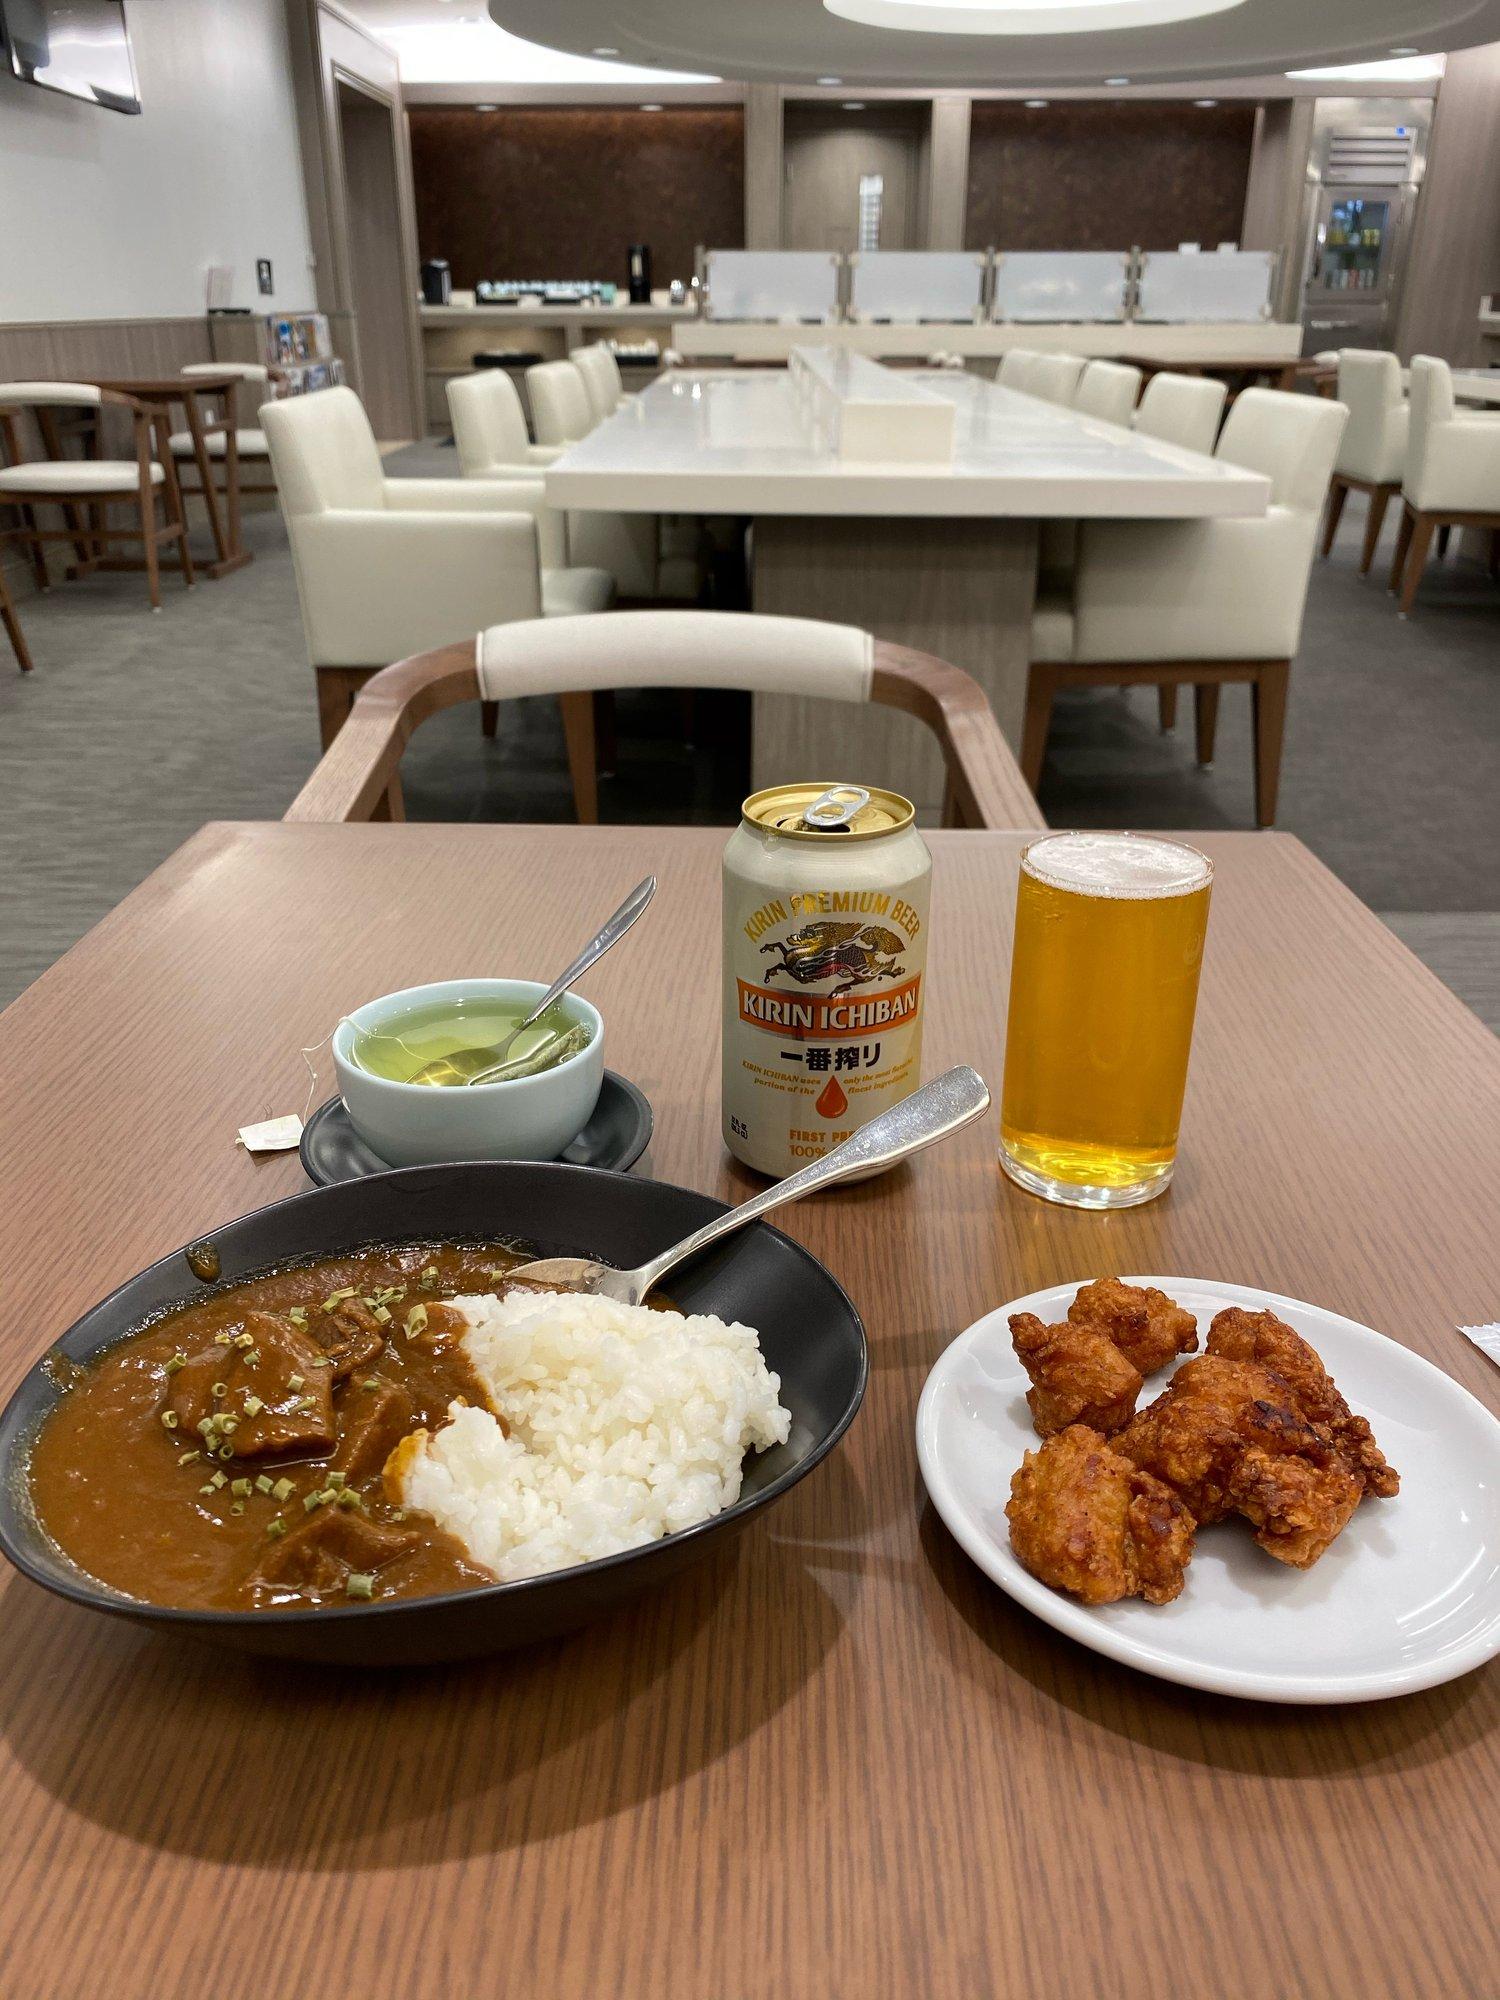 Japan Airlines JAL Sakura Lounge / American Airlines Admirals Club image 1 of 11